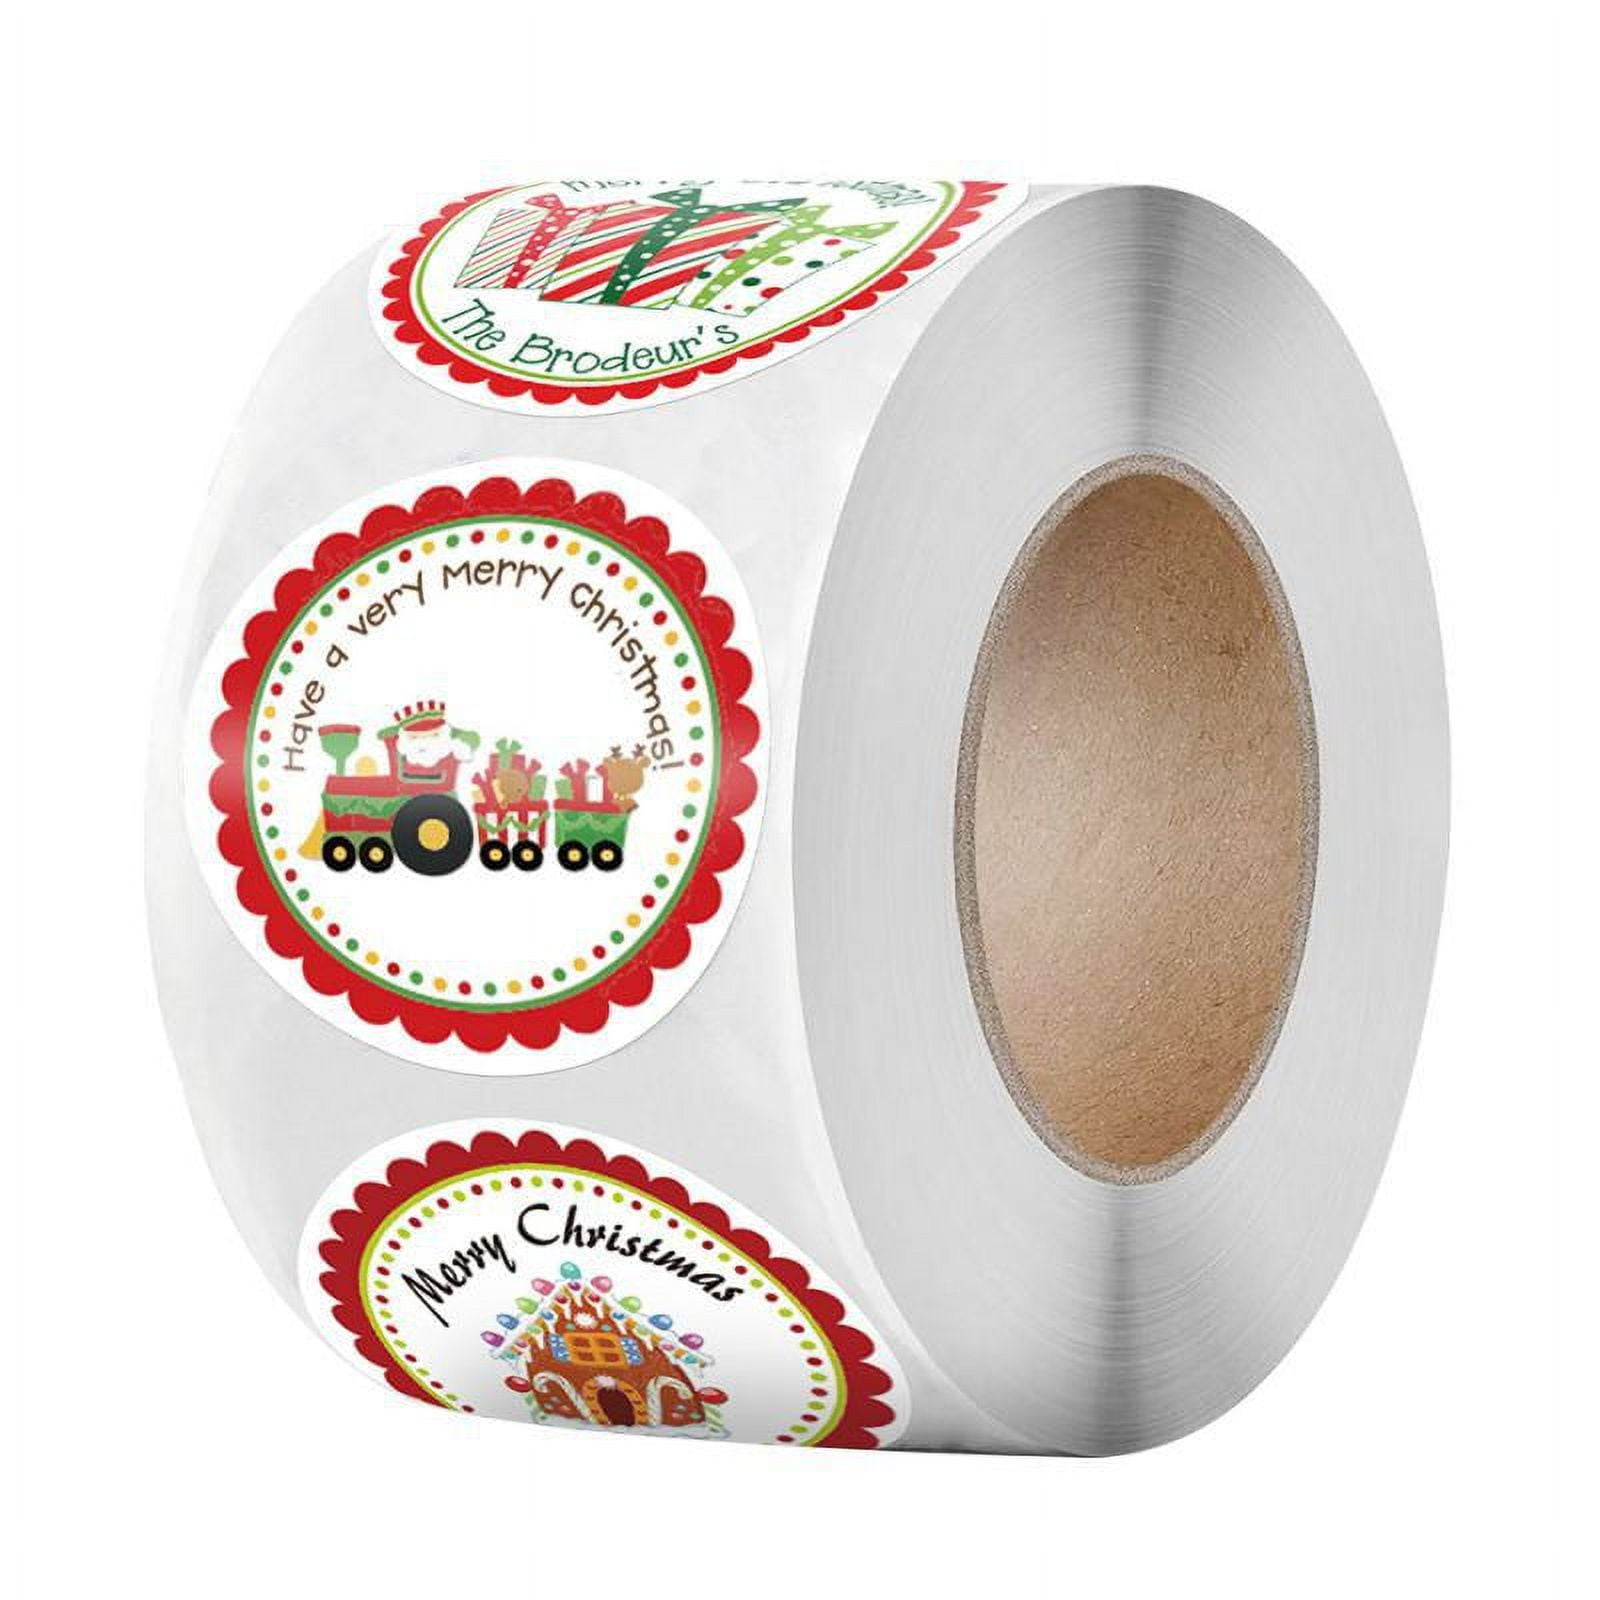 500Pcs Christmas Stickers for Envelope Round Christmas Roll Stickers Envelope  Stickers Xmas Label Tag Seal for Party Supplies Card Gift – the best  products in the Joom Geek online store